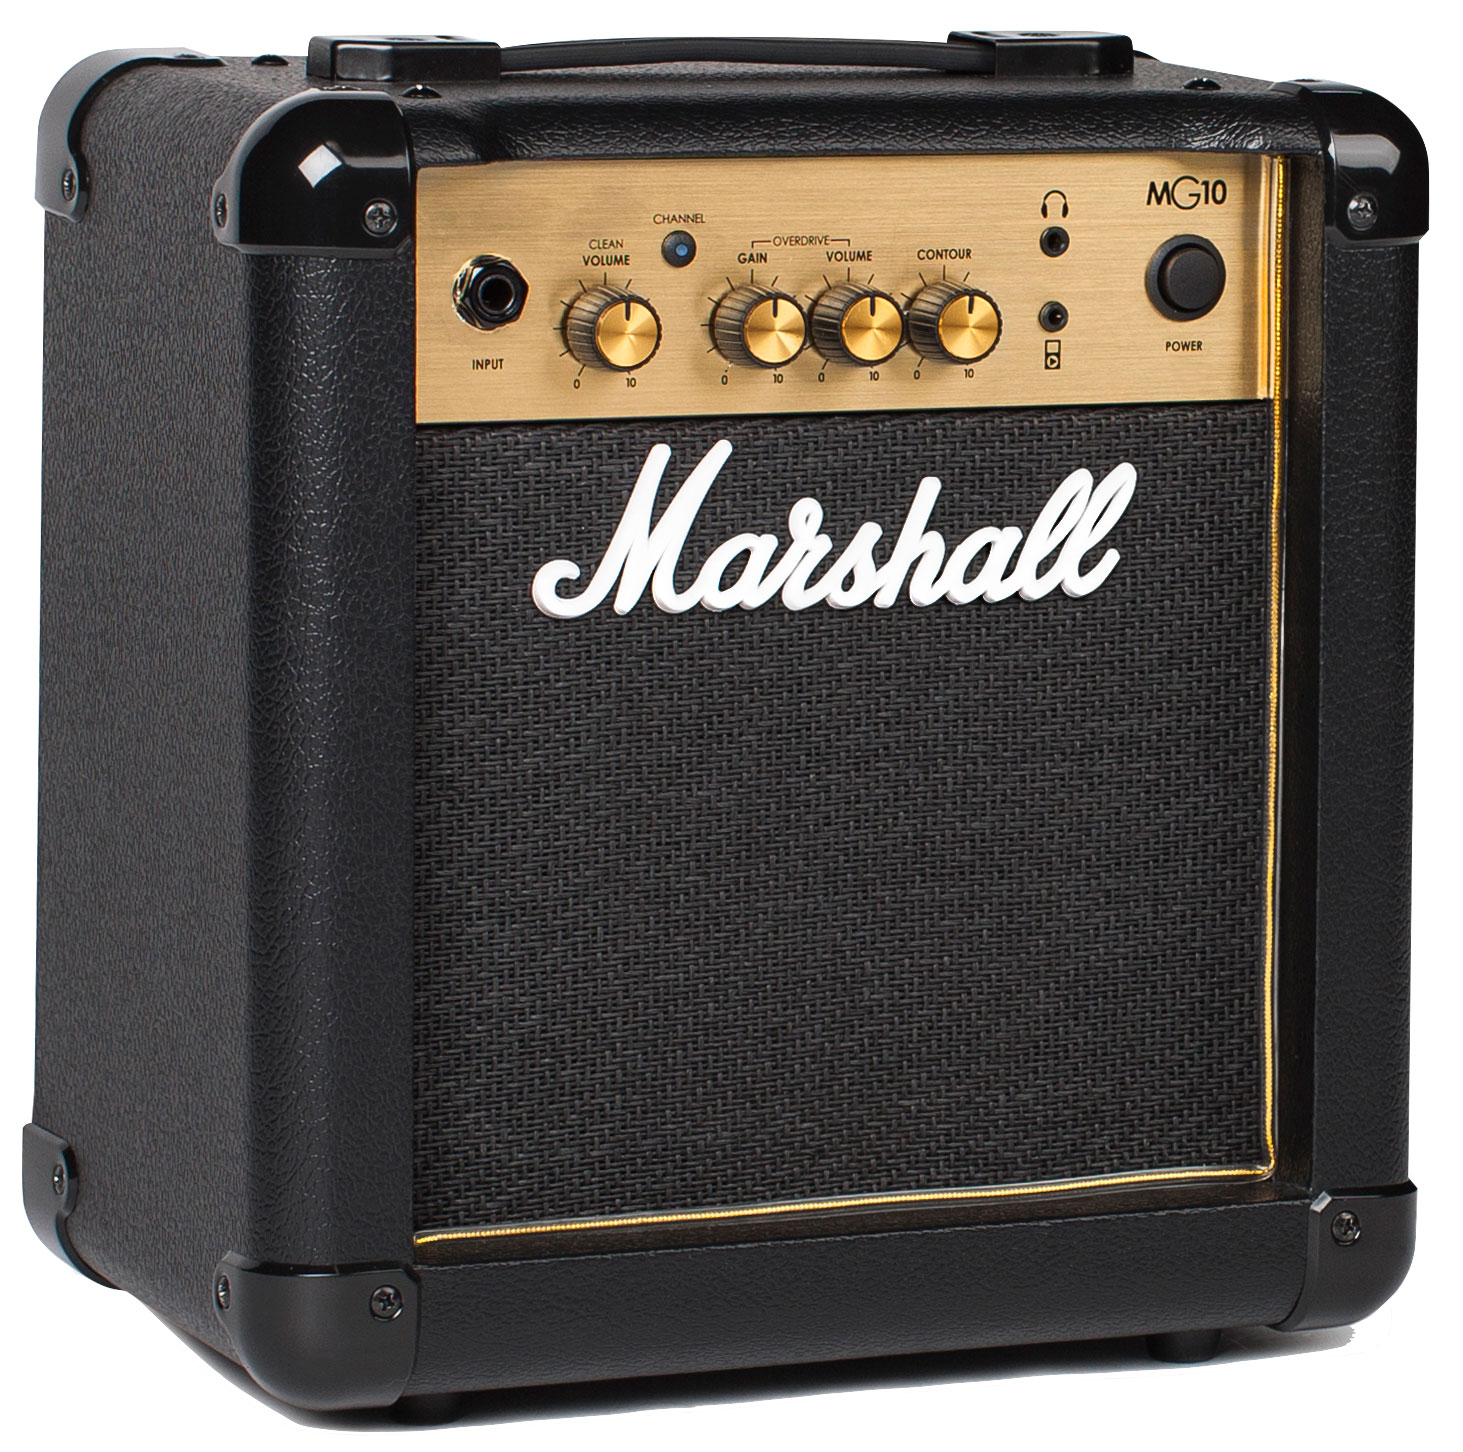 Eastone Tl70 +marshall Mg10g Combo 10 W +housse +courroie +cable +mediators - Olympic White - Pack Guitare Électrique - Variation 6